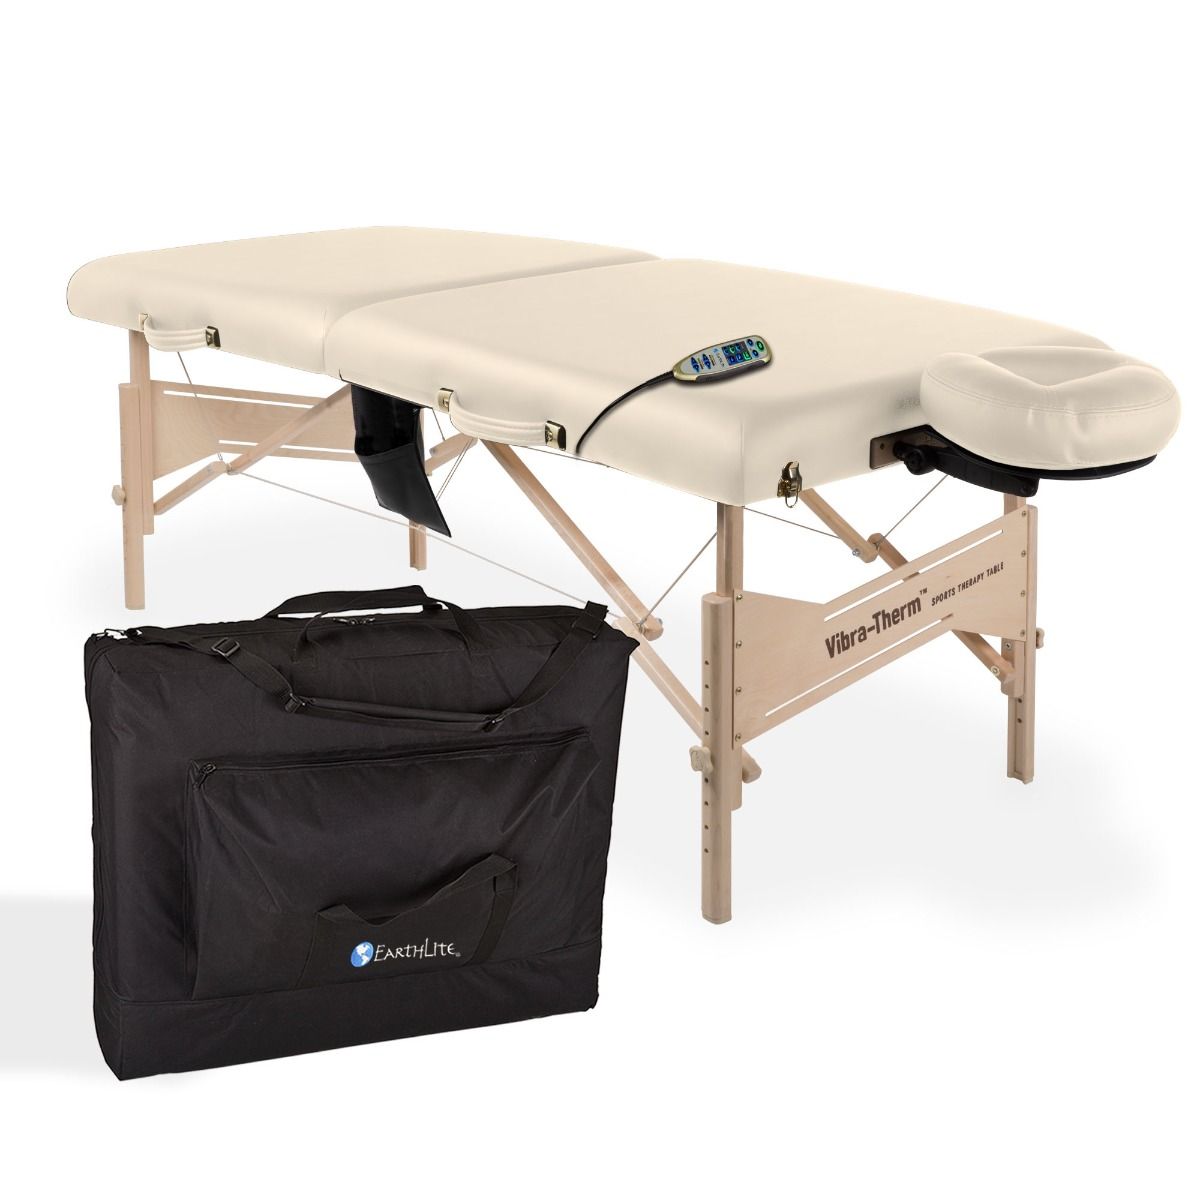 Earthlite Vibra-Therm™ Sports Therapy Table